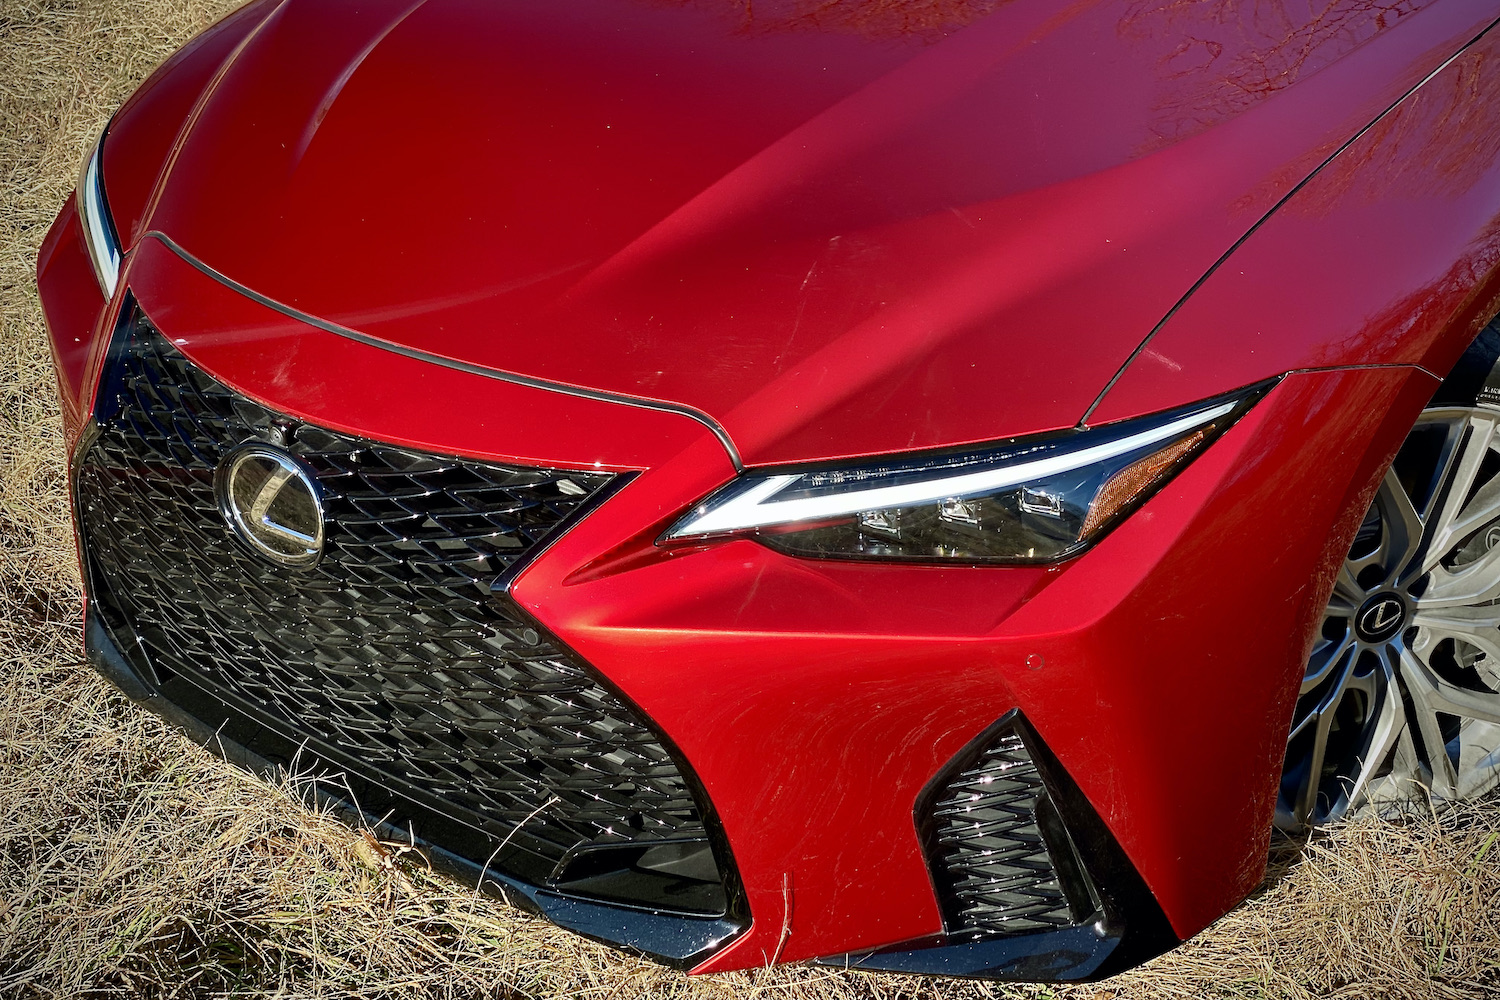 Close up of Lexus IS 500 front headlight in a grassy field.